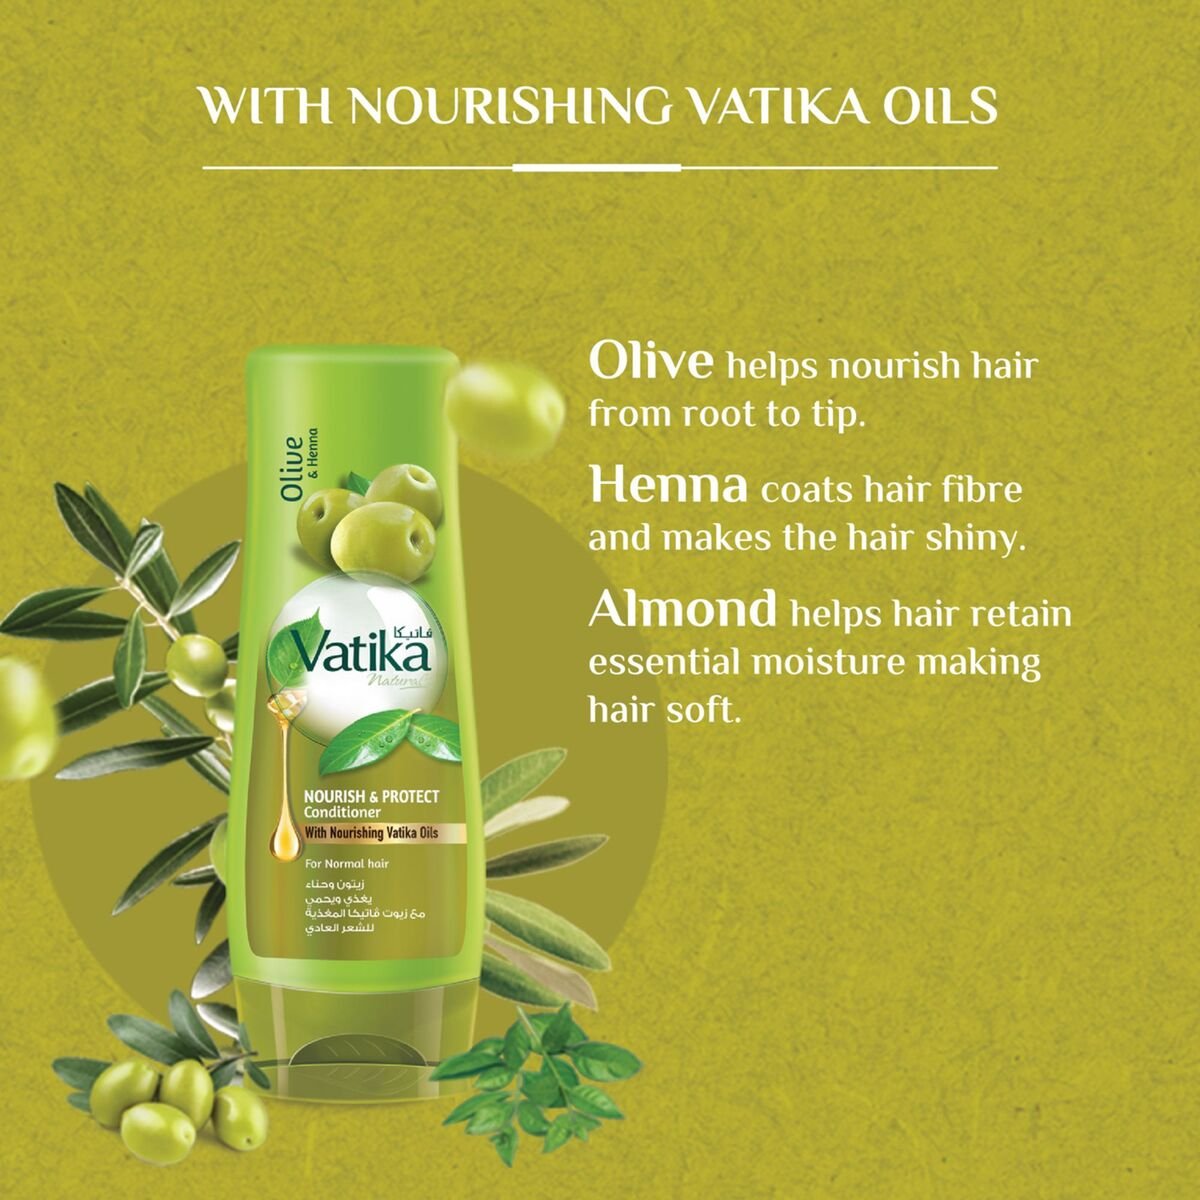 Vatika Naturals Nourish & Protect Conditioner Enriched With Olive & Henna for Normal Hair 200 ml